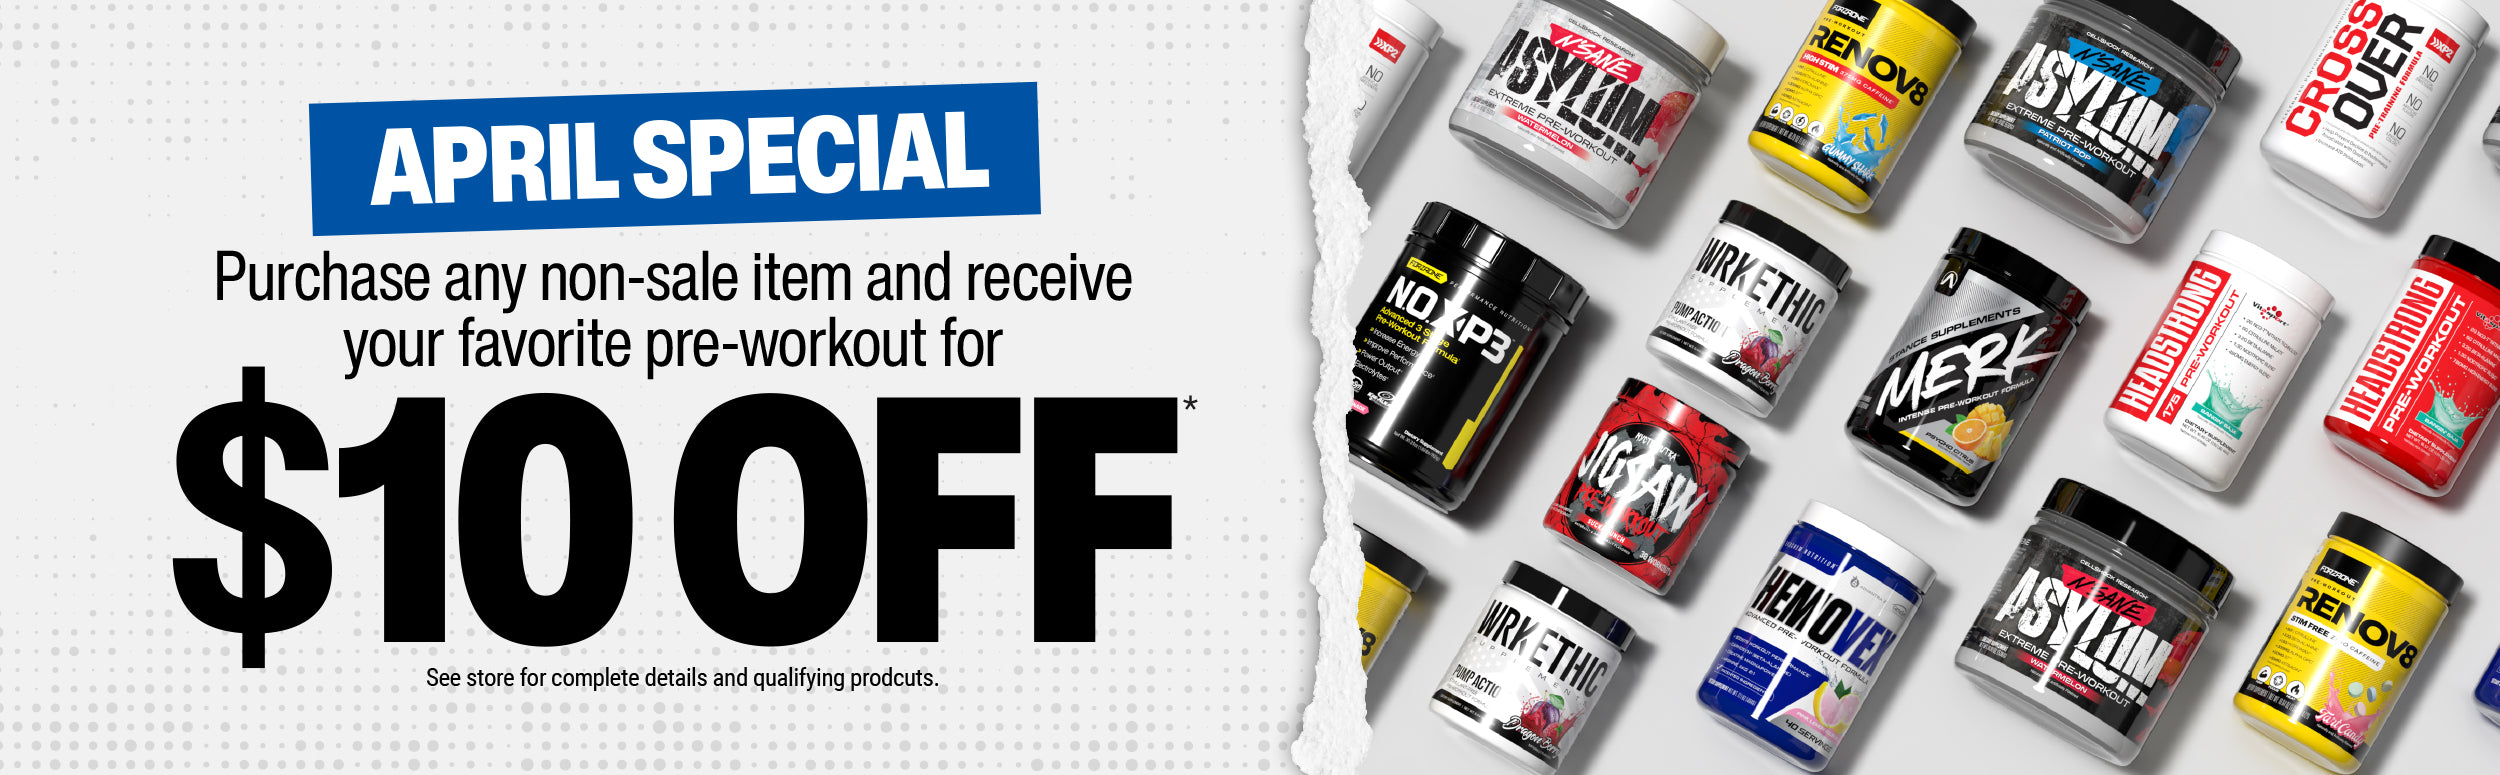 april monthly special - purchase any non-sale item and receive your favorite pre-workout for $10 off